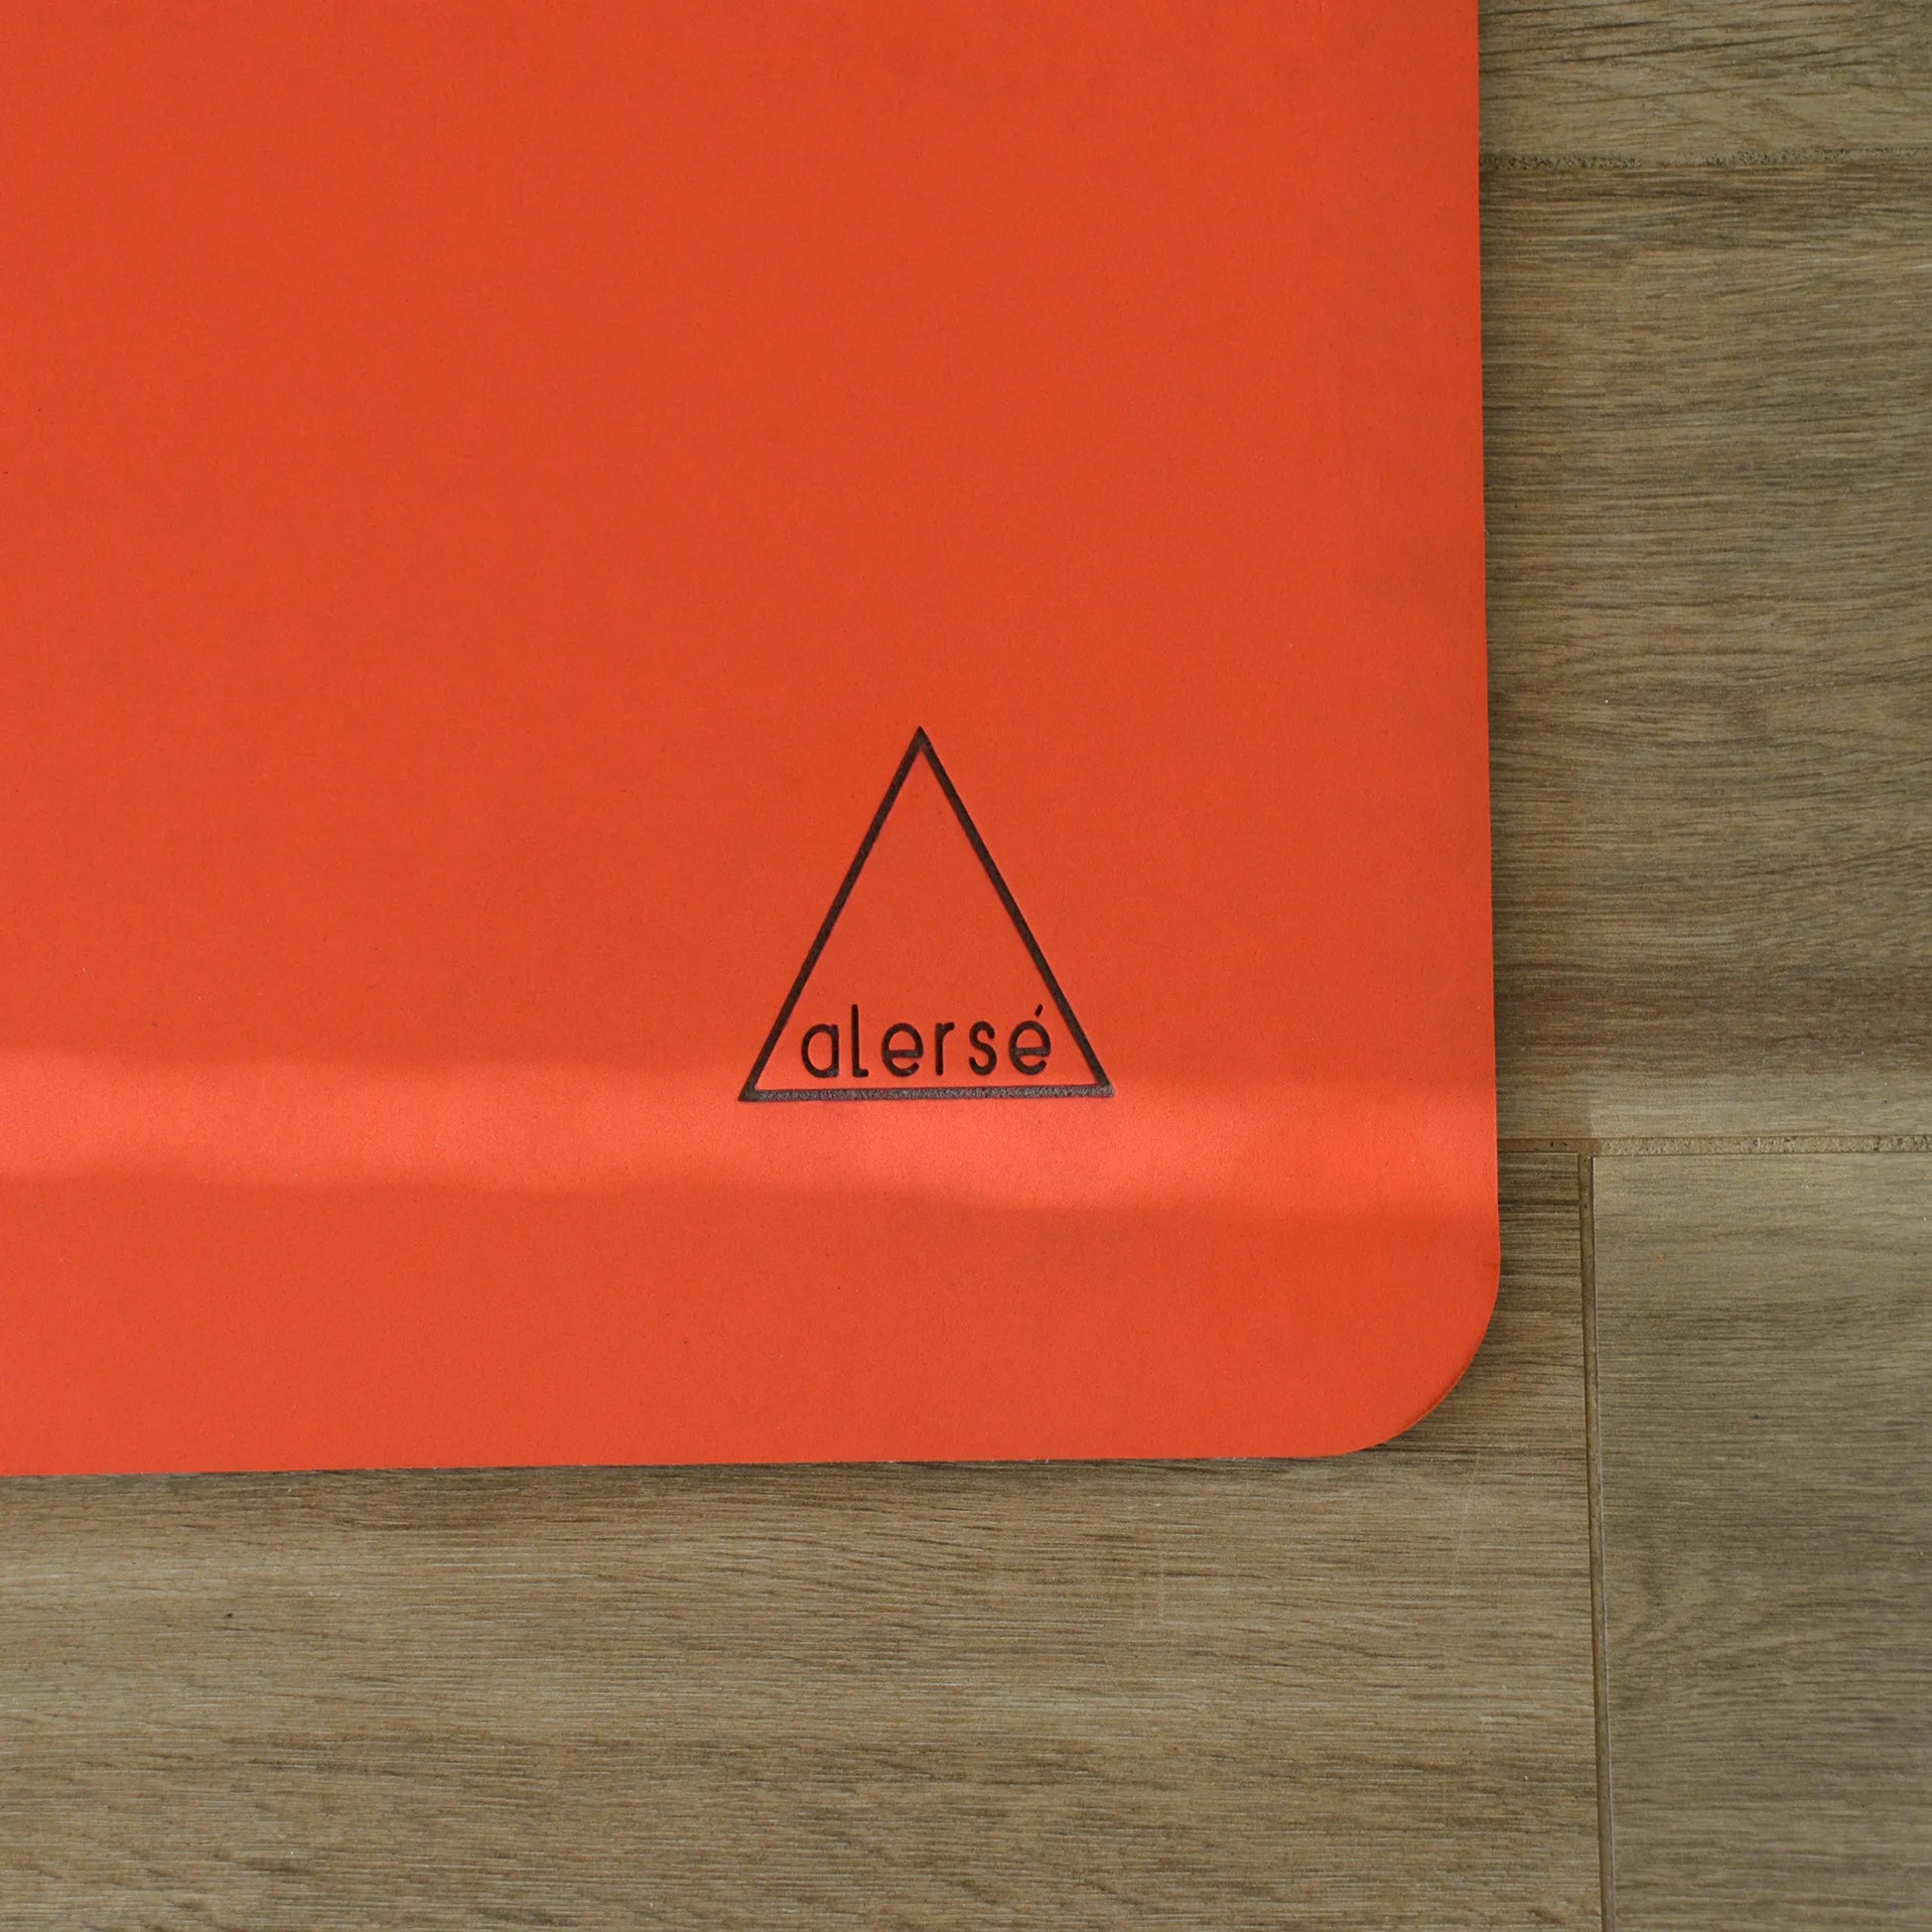 Corner of a red yoga mat with a Alerse logo on it.